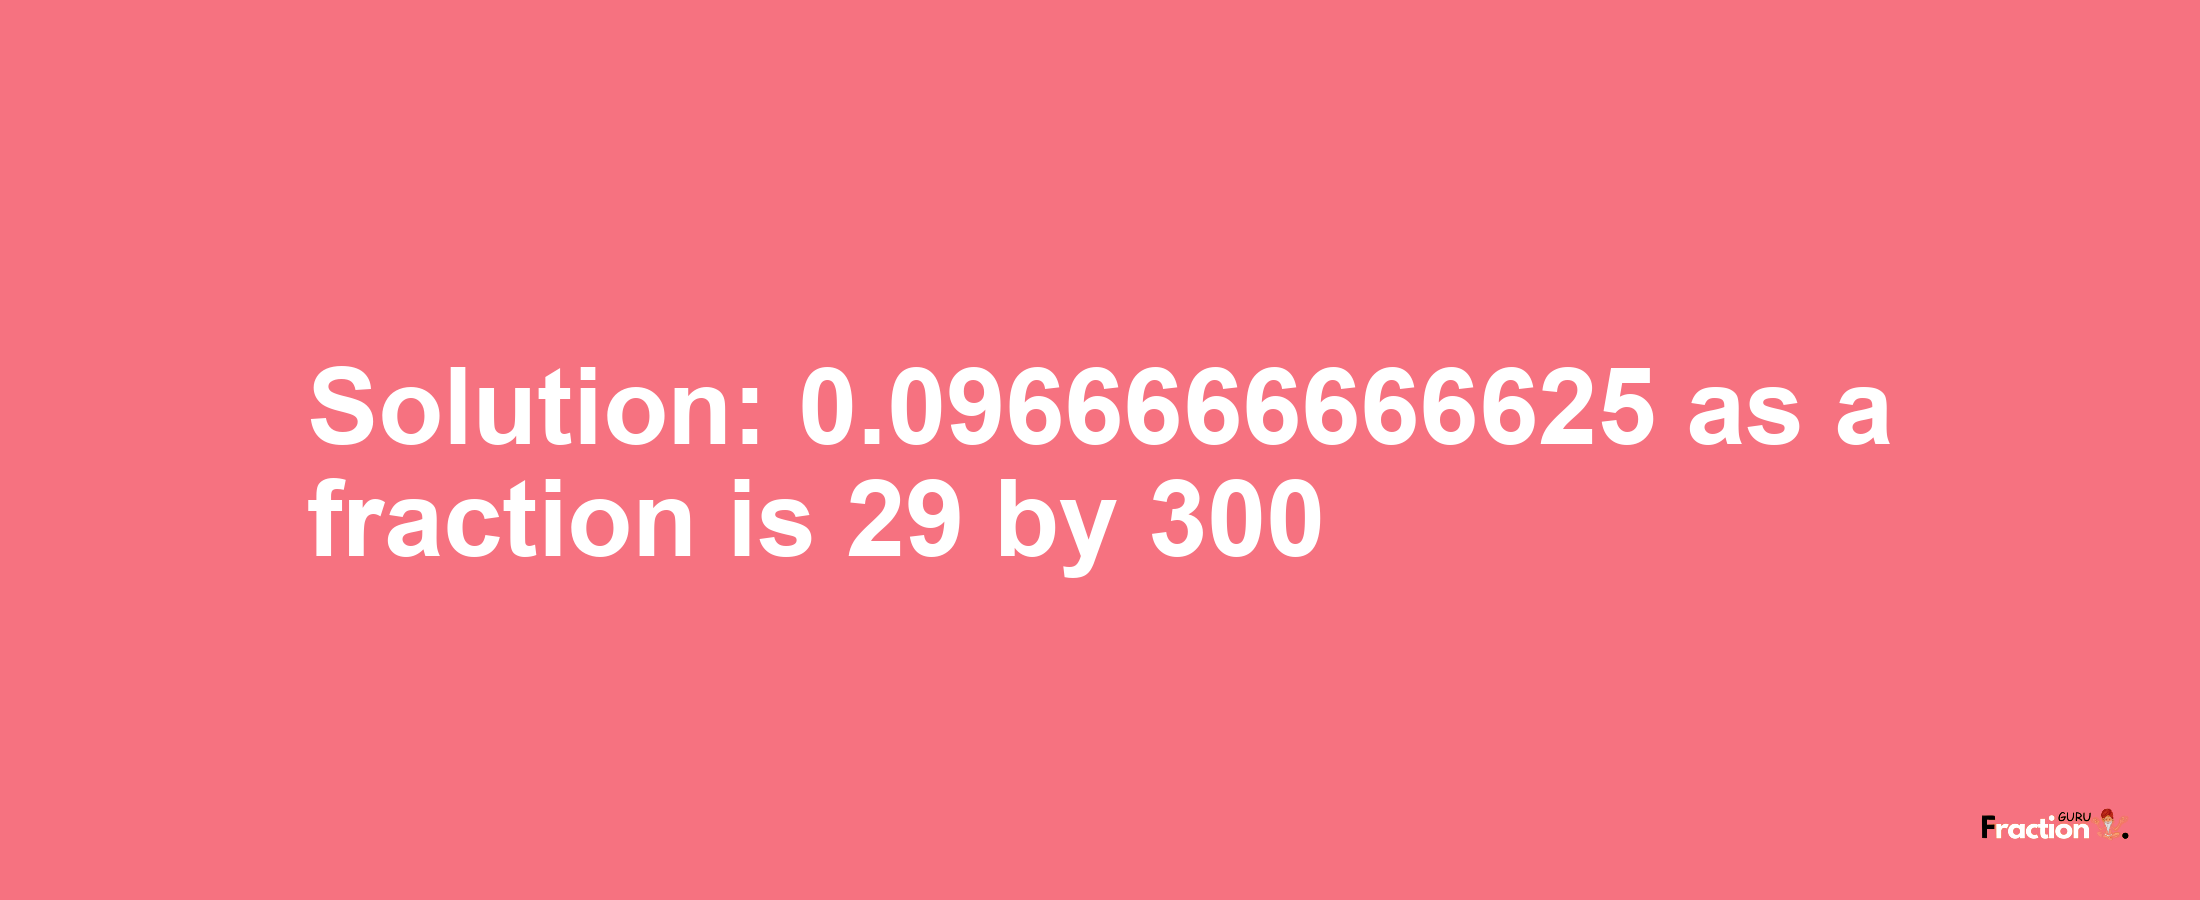 Solution:0.0966666666625 as a fraction is 29/300